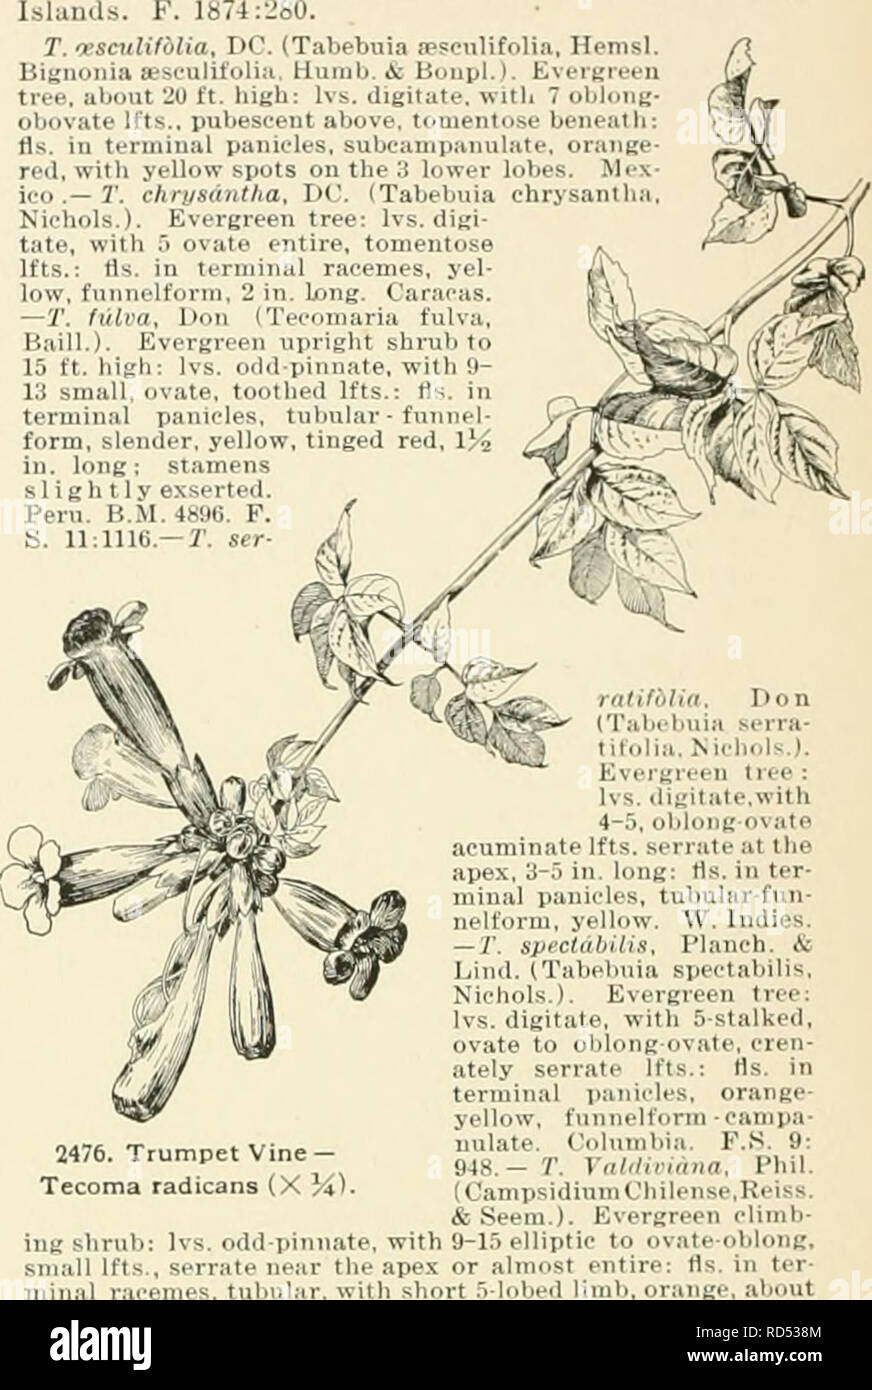 . Cyclopedia of American horticulture, comprising suggestions for cultivation of horticultural plants, descriptions of the species of fruits, vegetables, flowers, and ornamental plants sold in the United States and Canada, together with geographical and biographical sketches. Gardening. 3 9 inte 1 entire o 5 coarsely ere ling above gli lobed limb with crenate lobes throat P 2 m I 1 g calyx si B H &quot;3 ^00&quot; B M 4004 K H is a trade name TEOOPHIL-EA 13 Jllicifolia Nichols (Campsidium fihor)! im an ( eeit) Climl ing evergreen shrub Ivs odd pin ate 5 in long Ifts 19 ^5 ovate with 2 or i lob Stock Photo